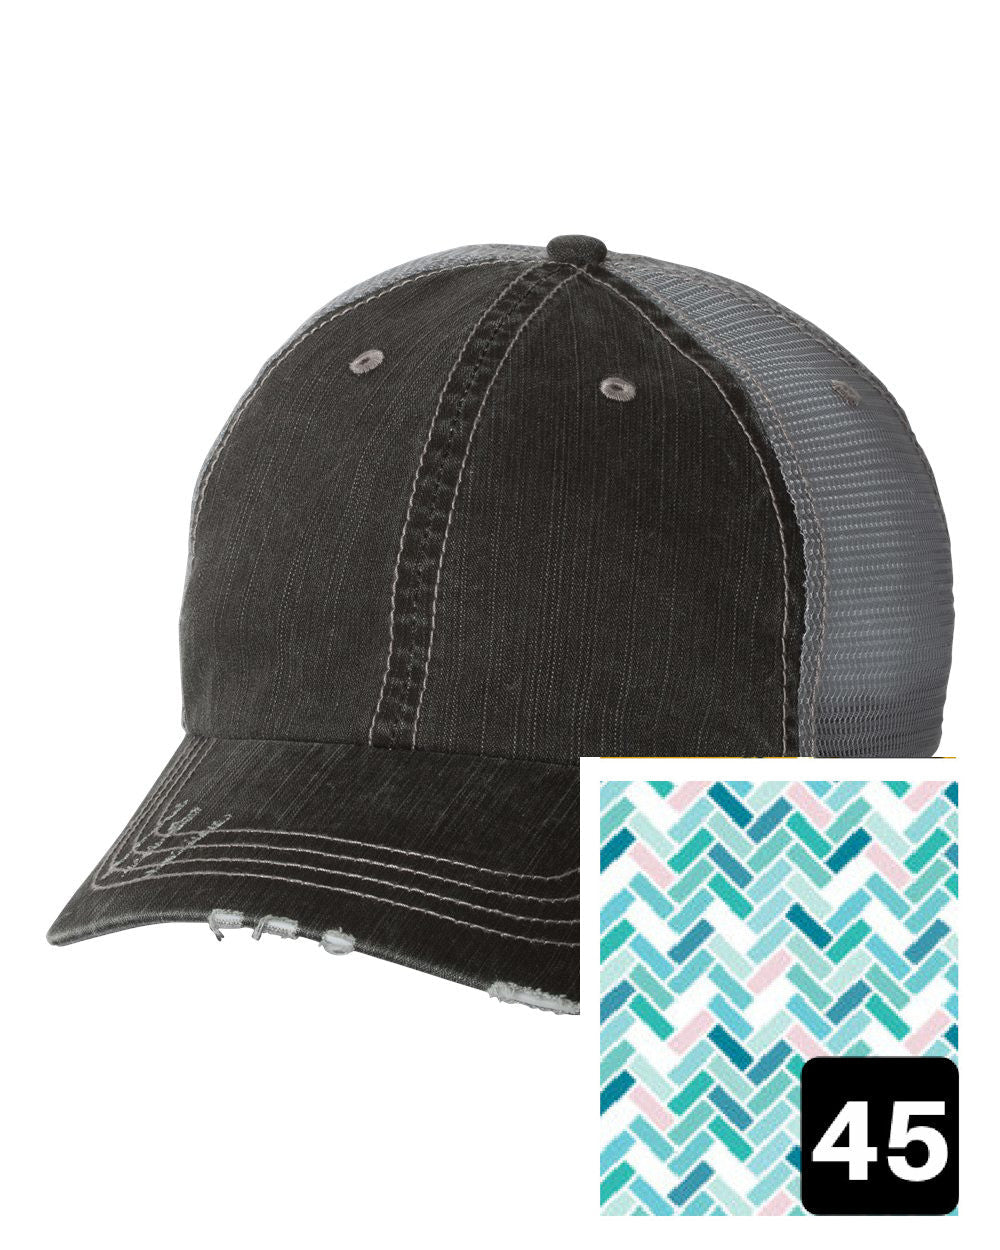 gray distressed trucker hat with navy coral and white chevron fabric state of Maine